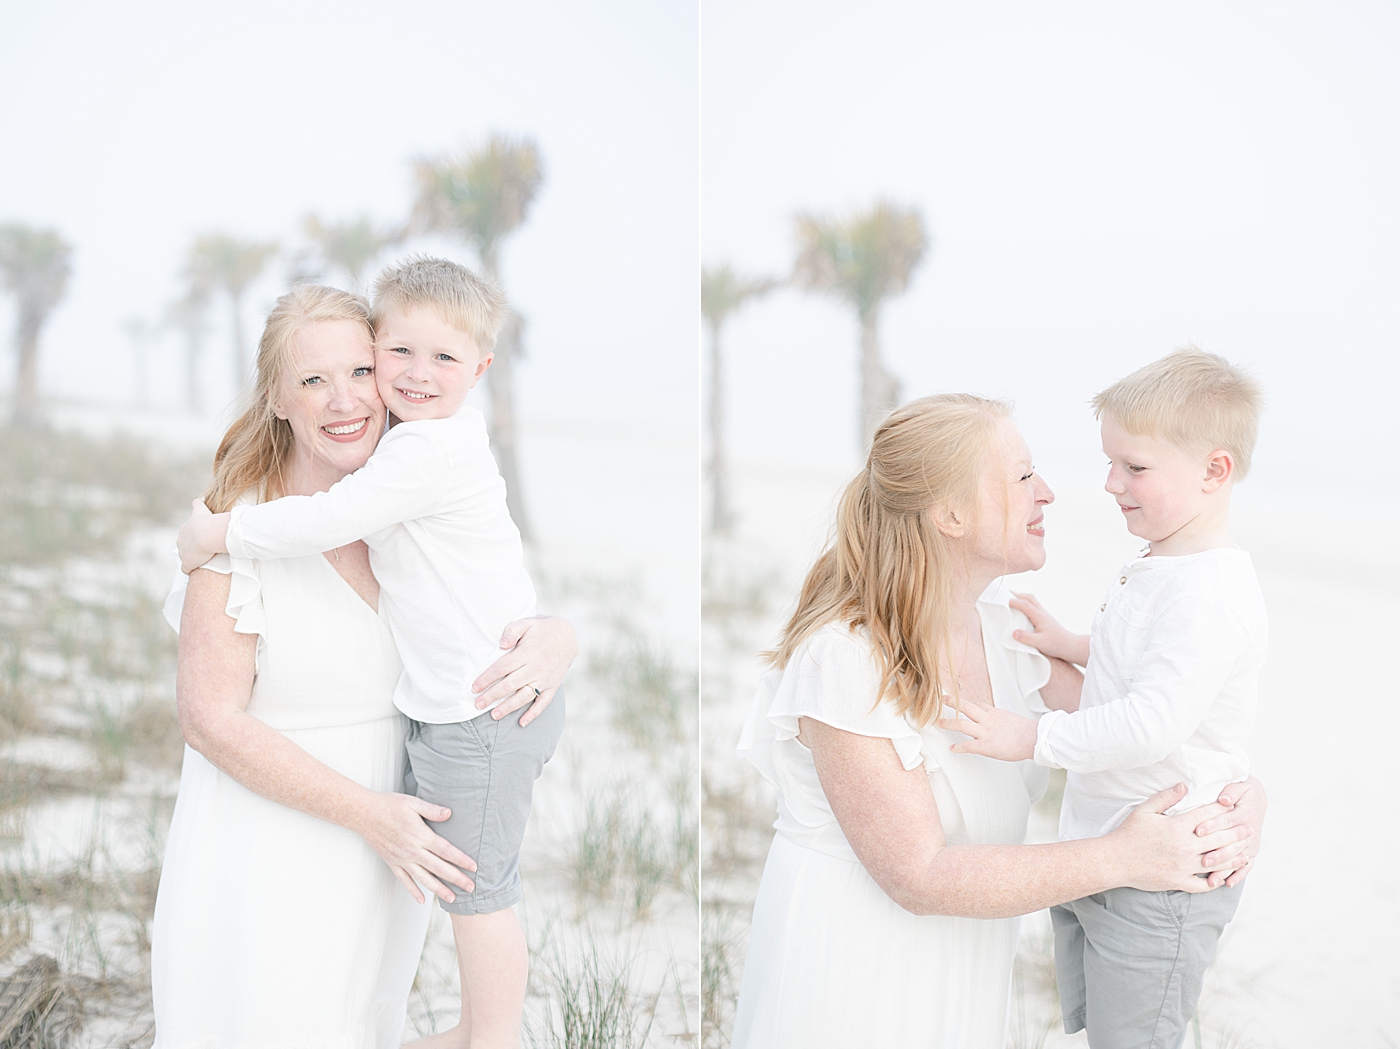 Mother-son photos on the beach. Photo by Little Sunshine Photography.